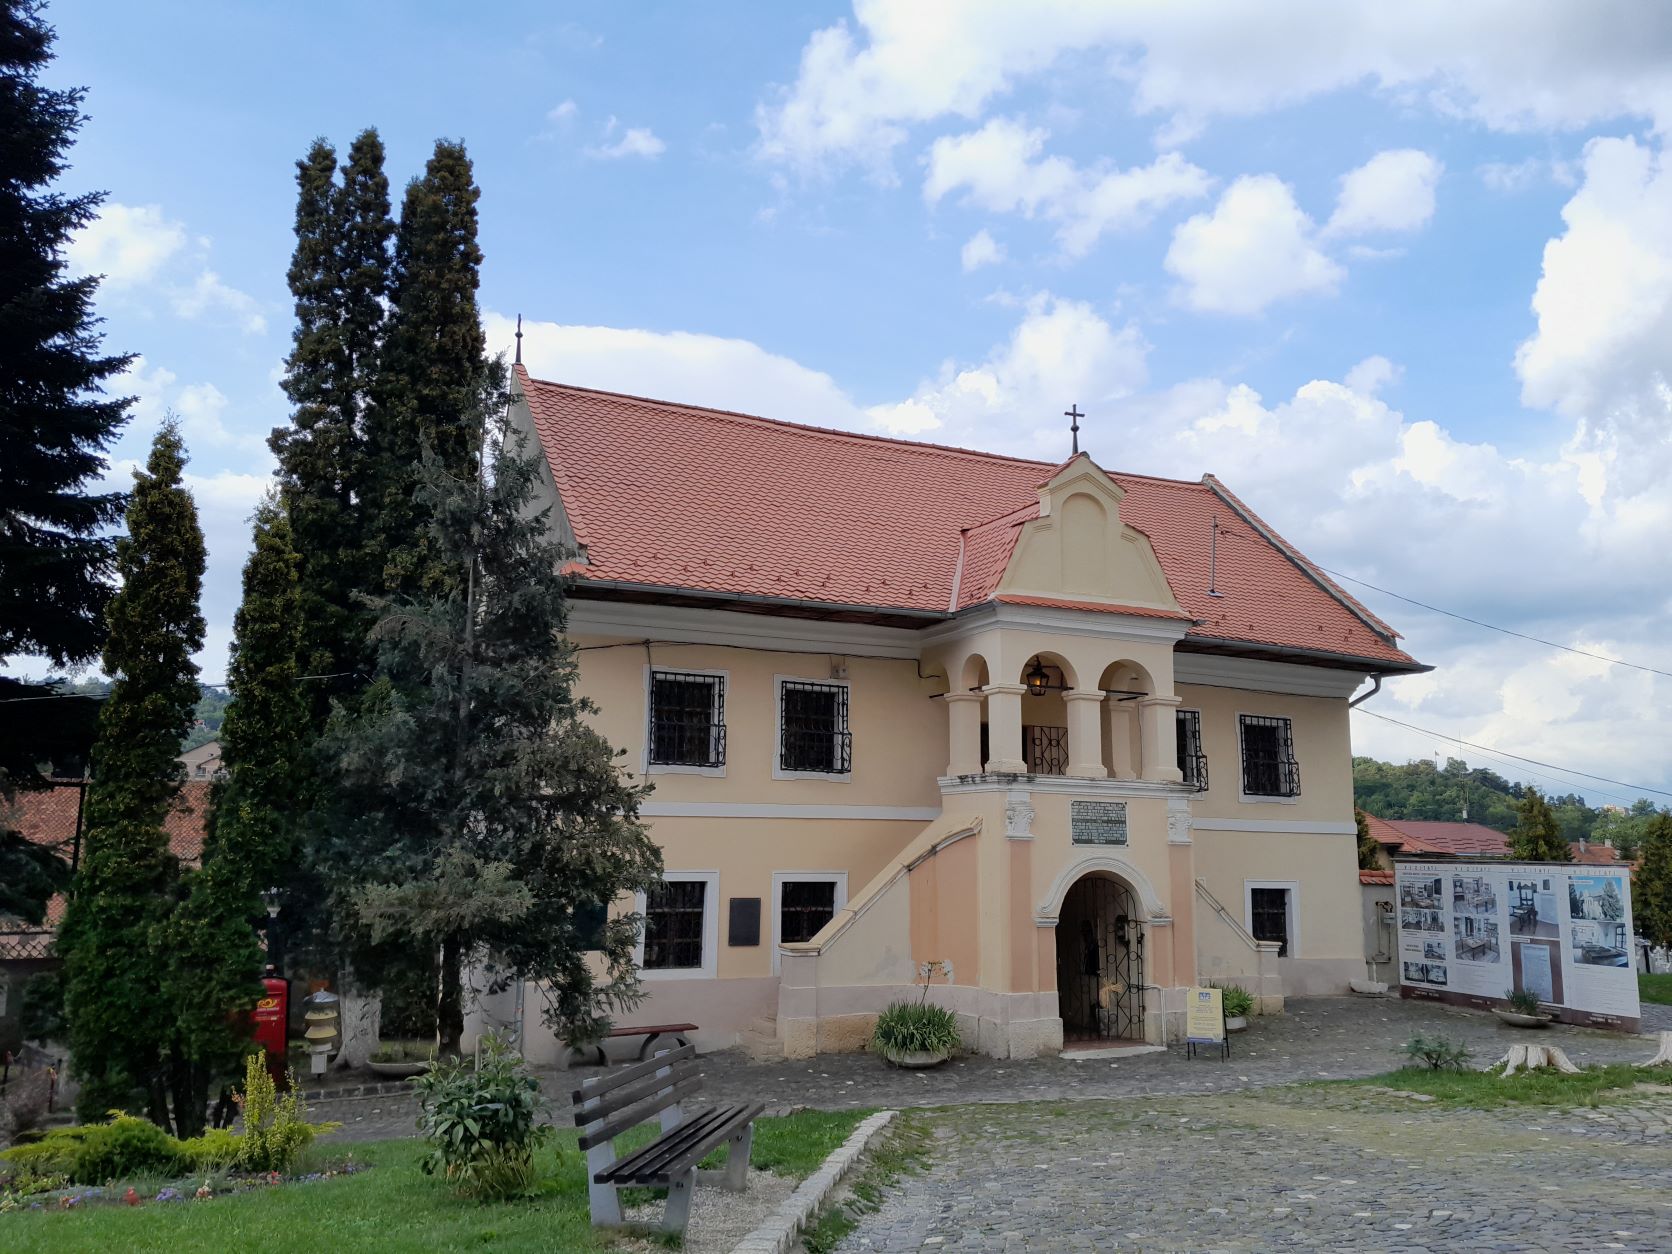 First Romanian School ( erected in 1495 )